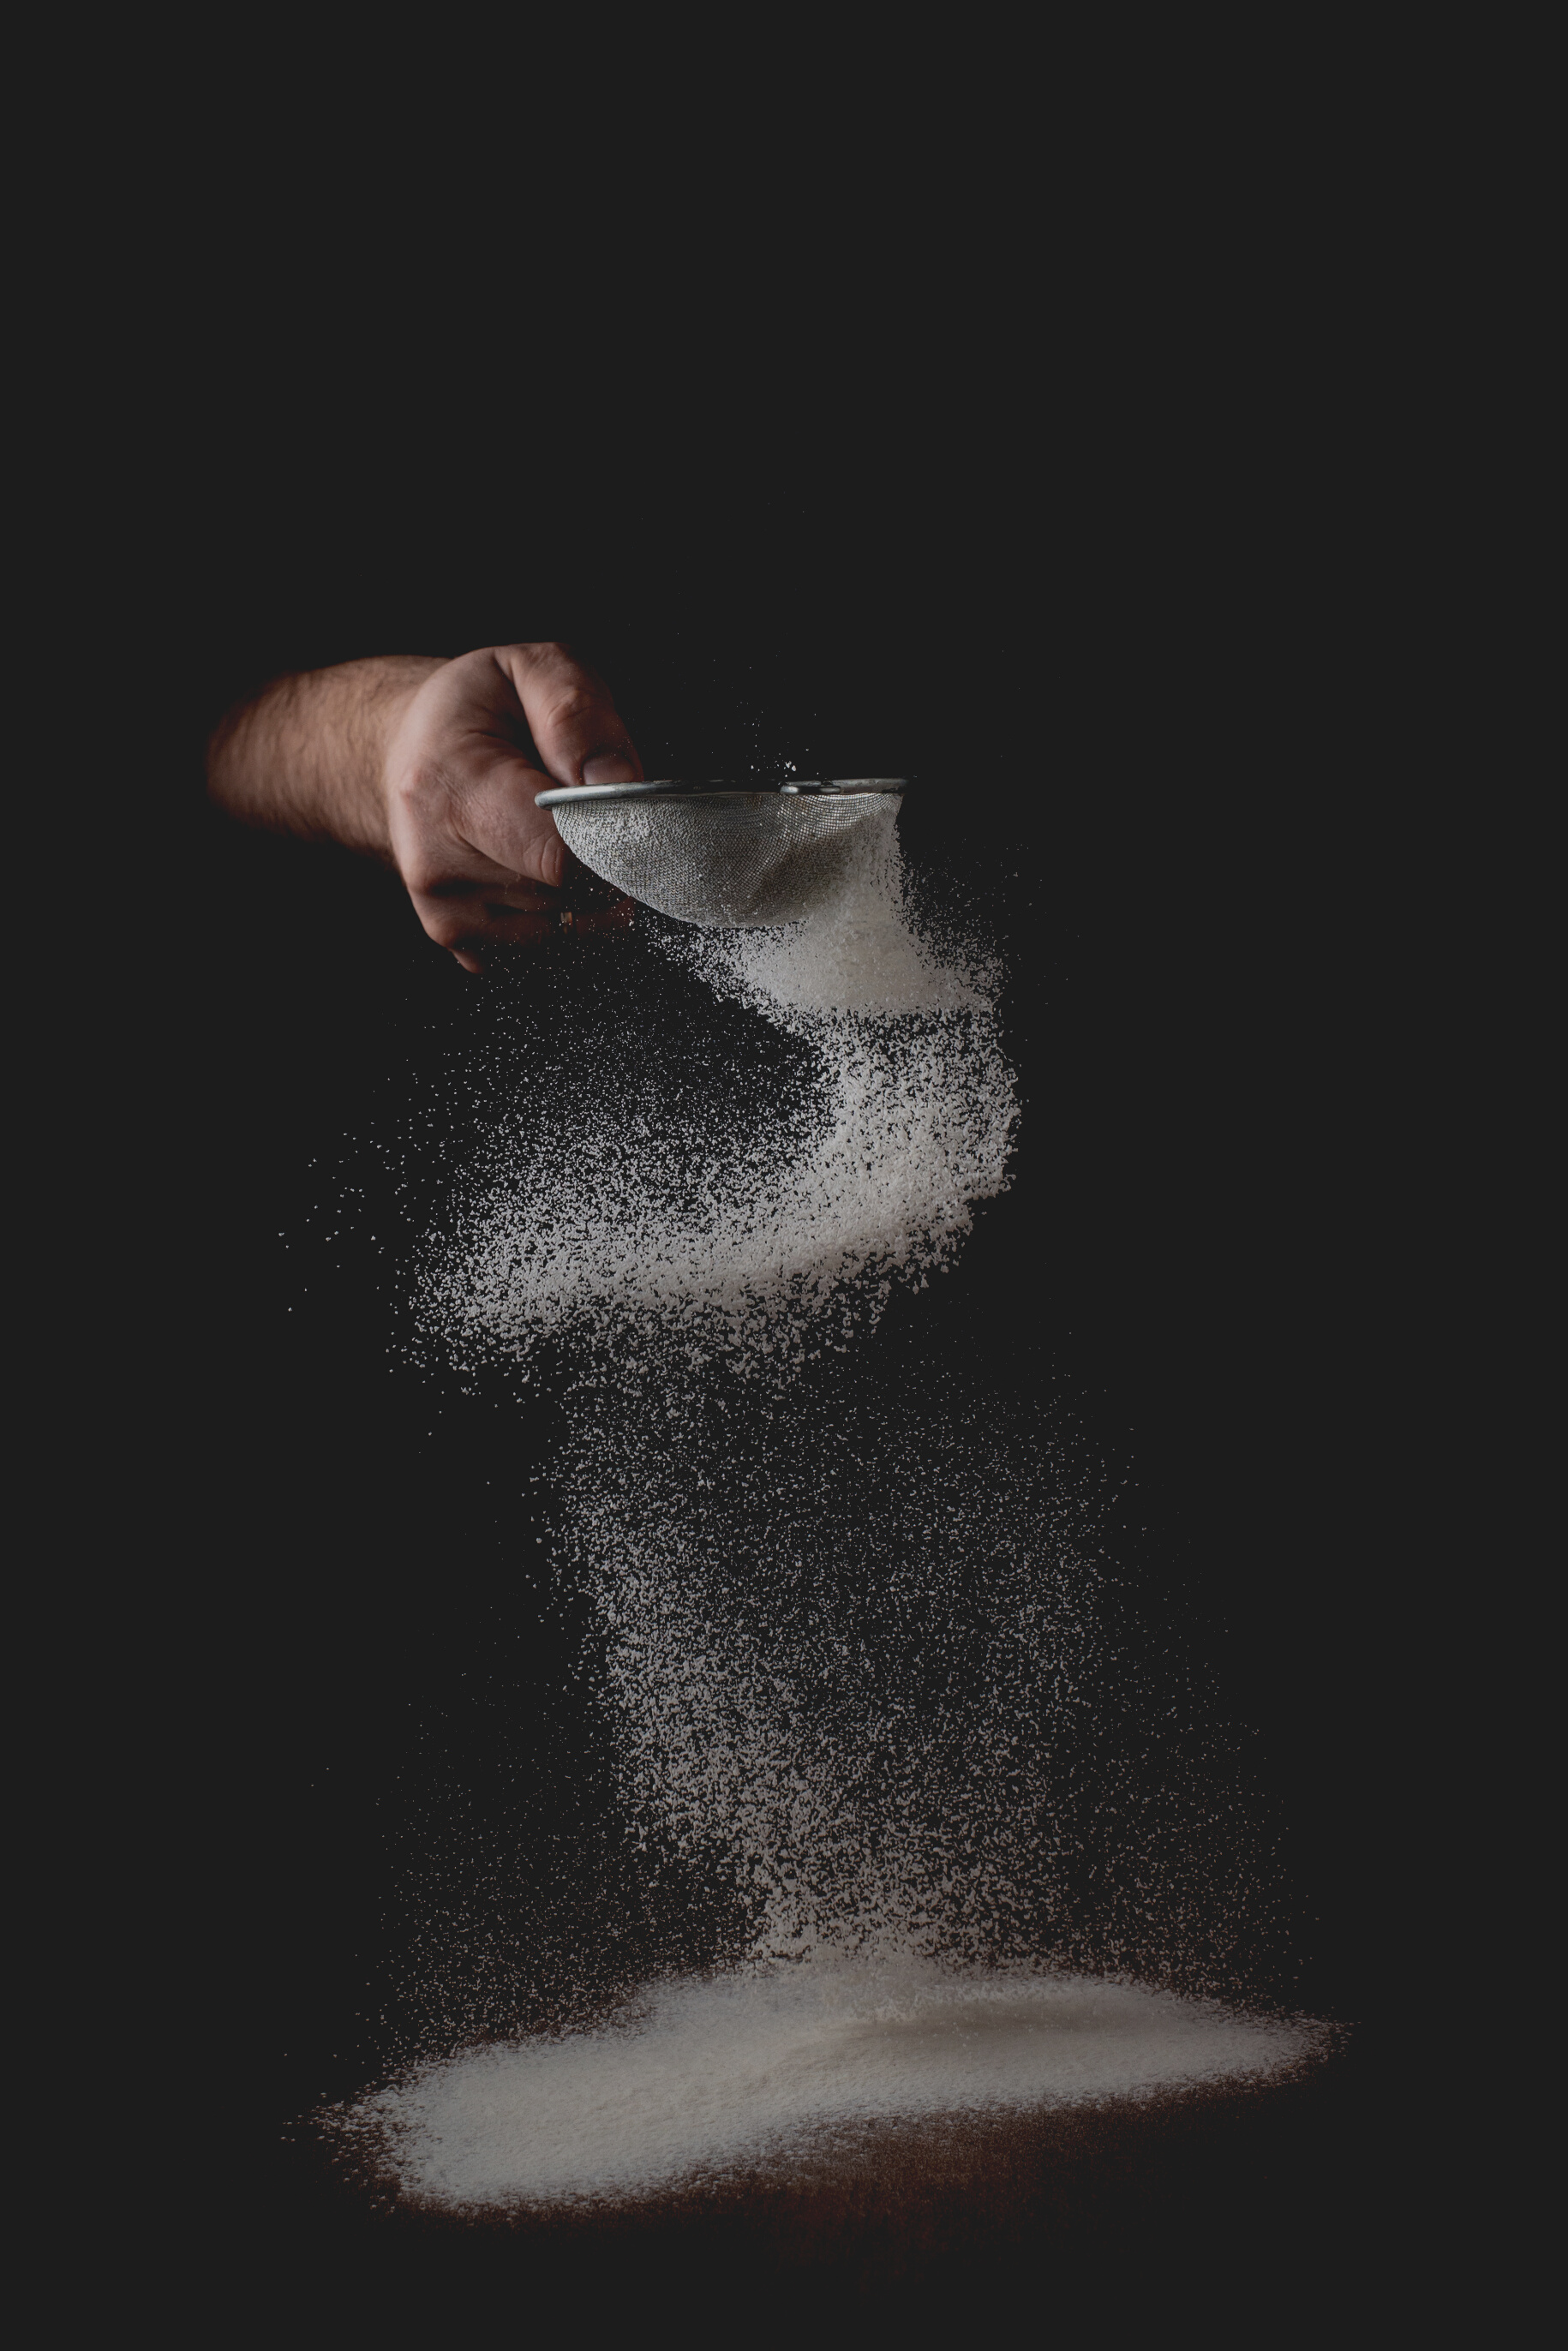 Flour Flies through a Sieve on a Black Background. a Man Sifts Flour for Cooking. Culinary Theme.